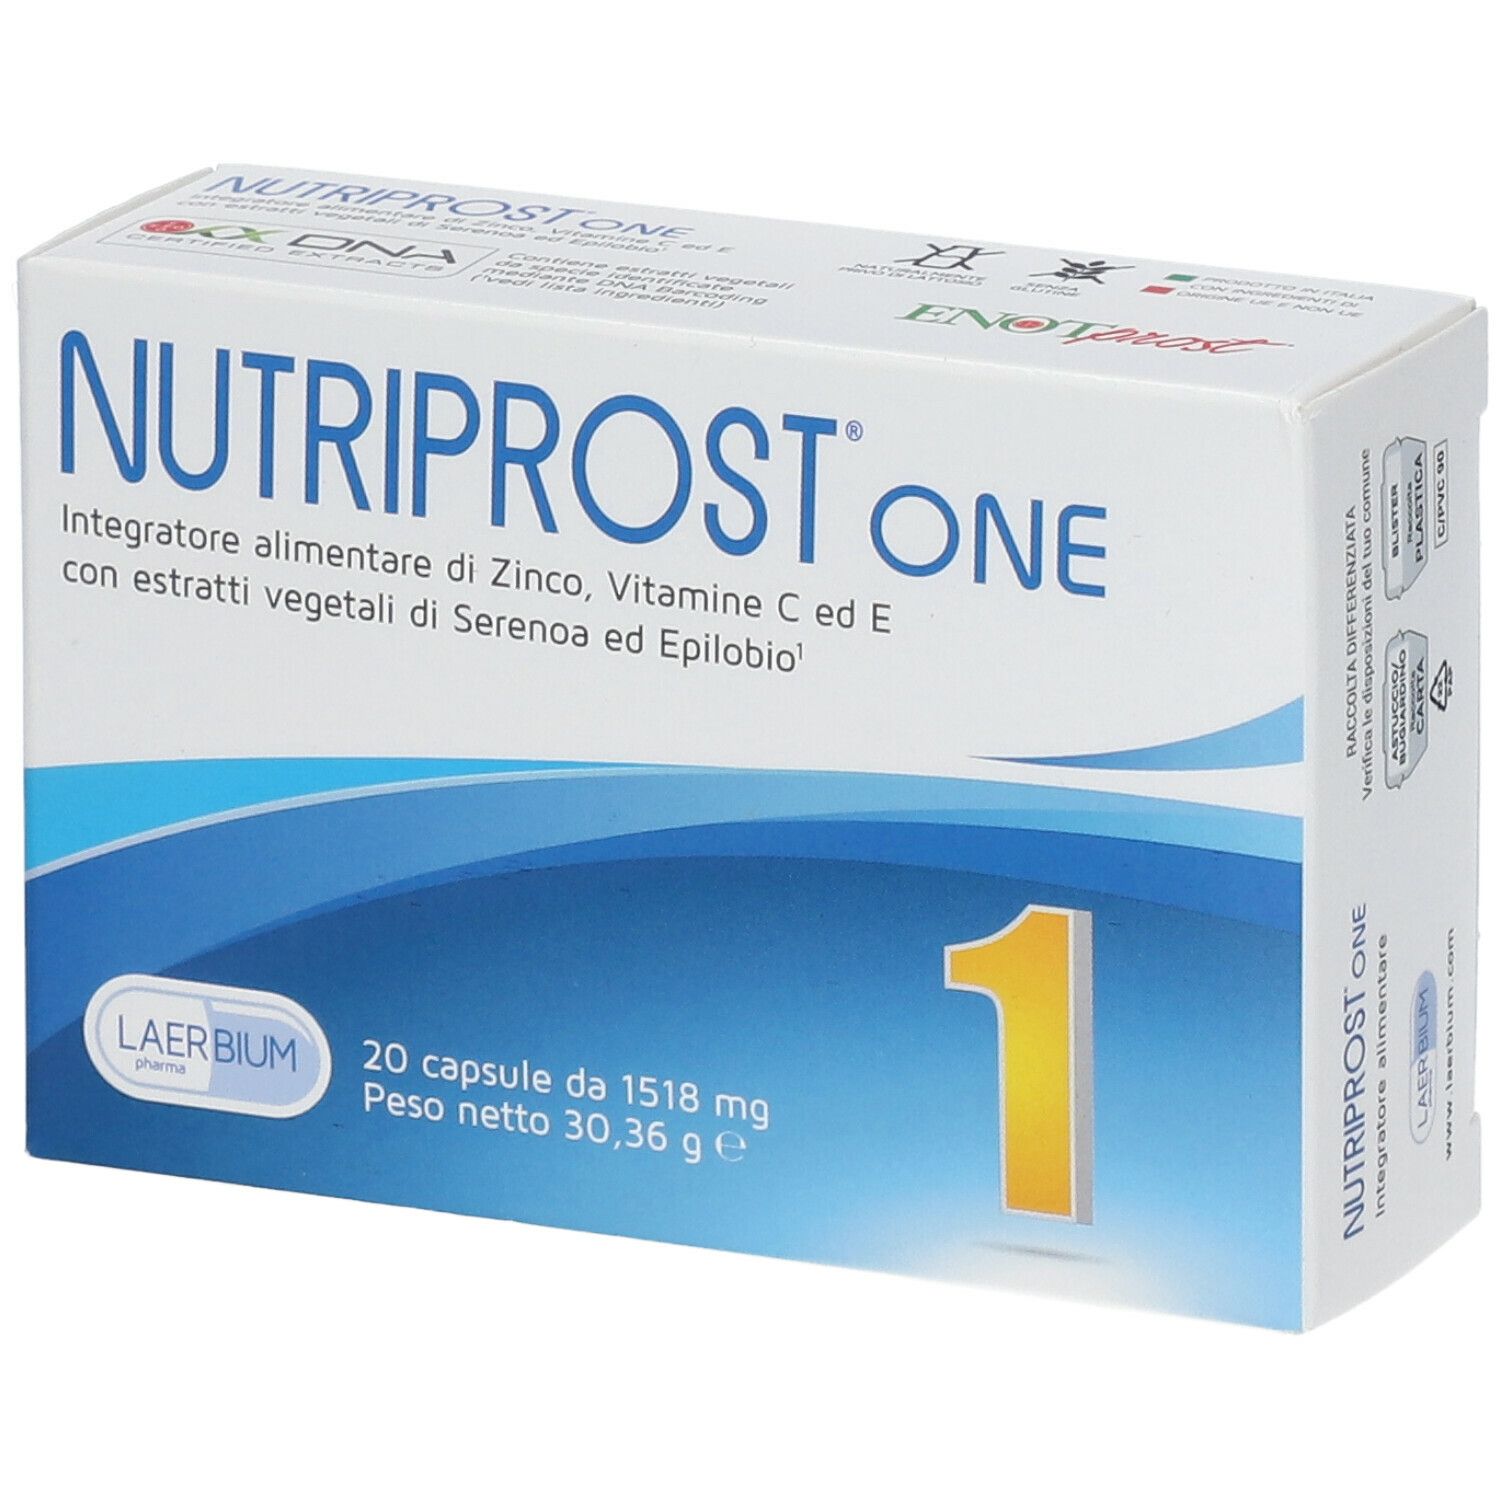 NUTRIPROST® ONE